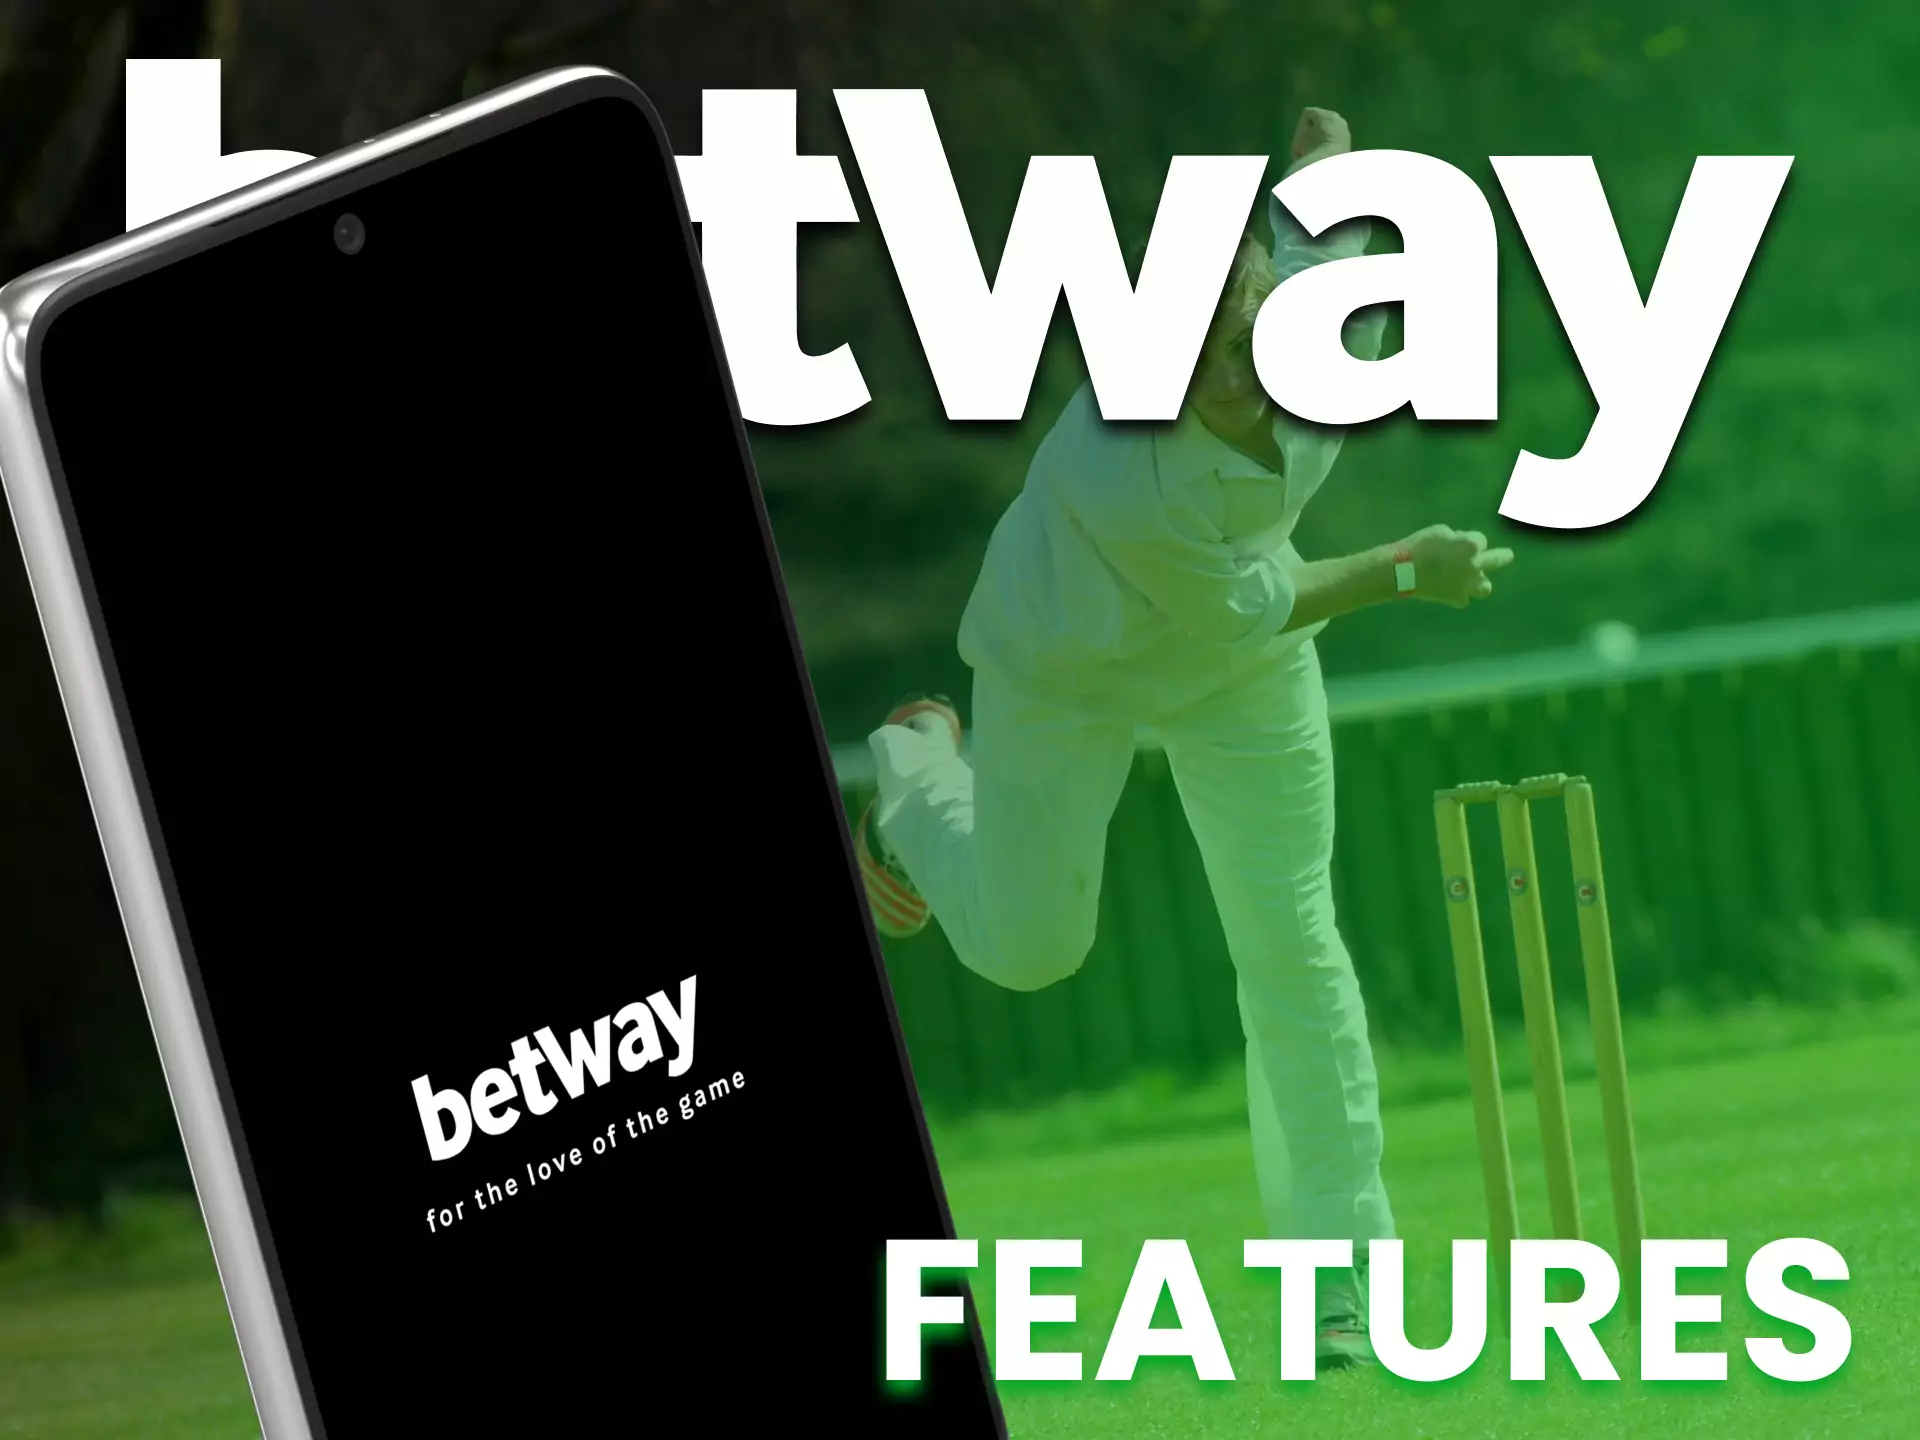 Learn about the different features of the Betway app.